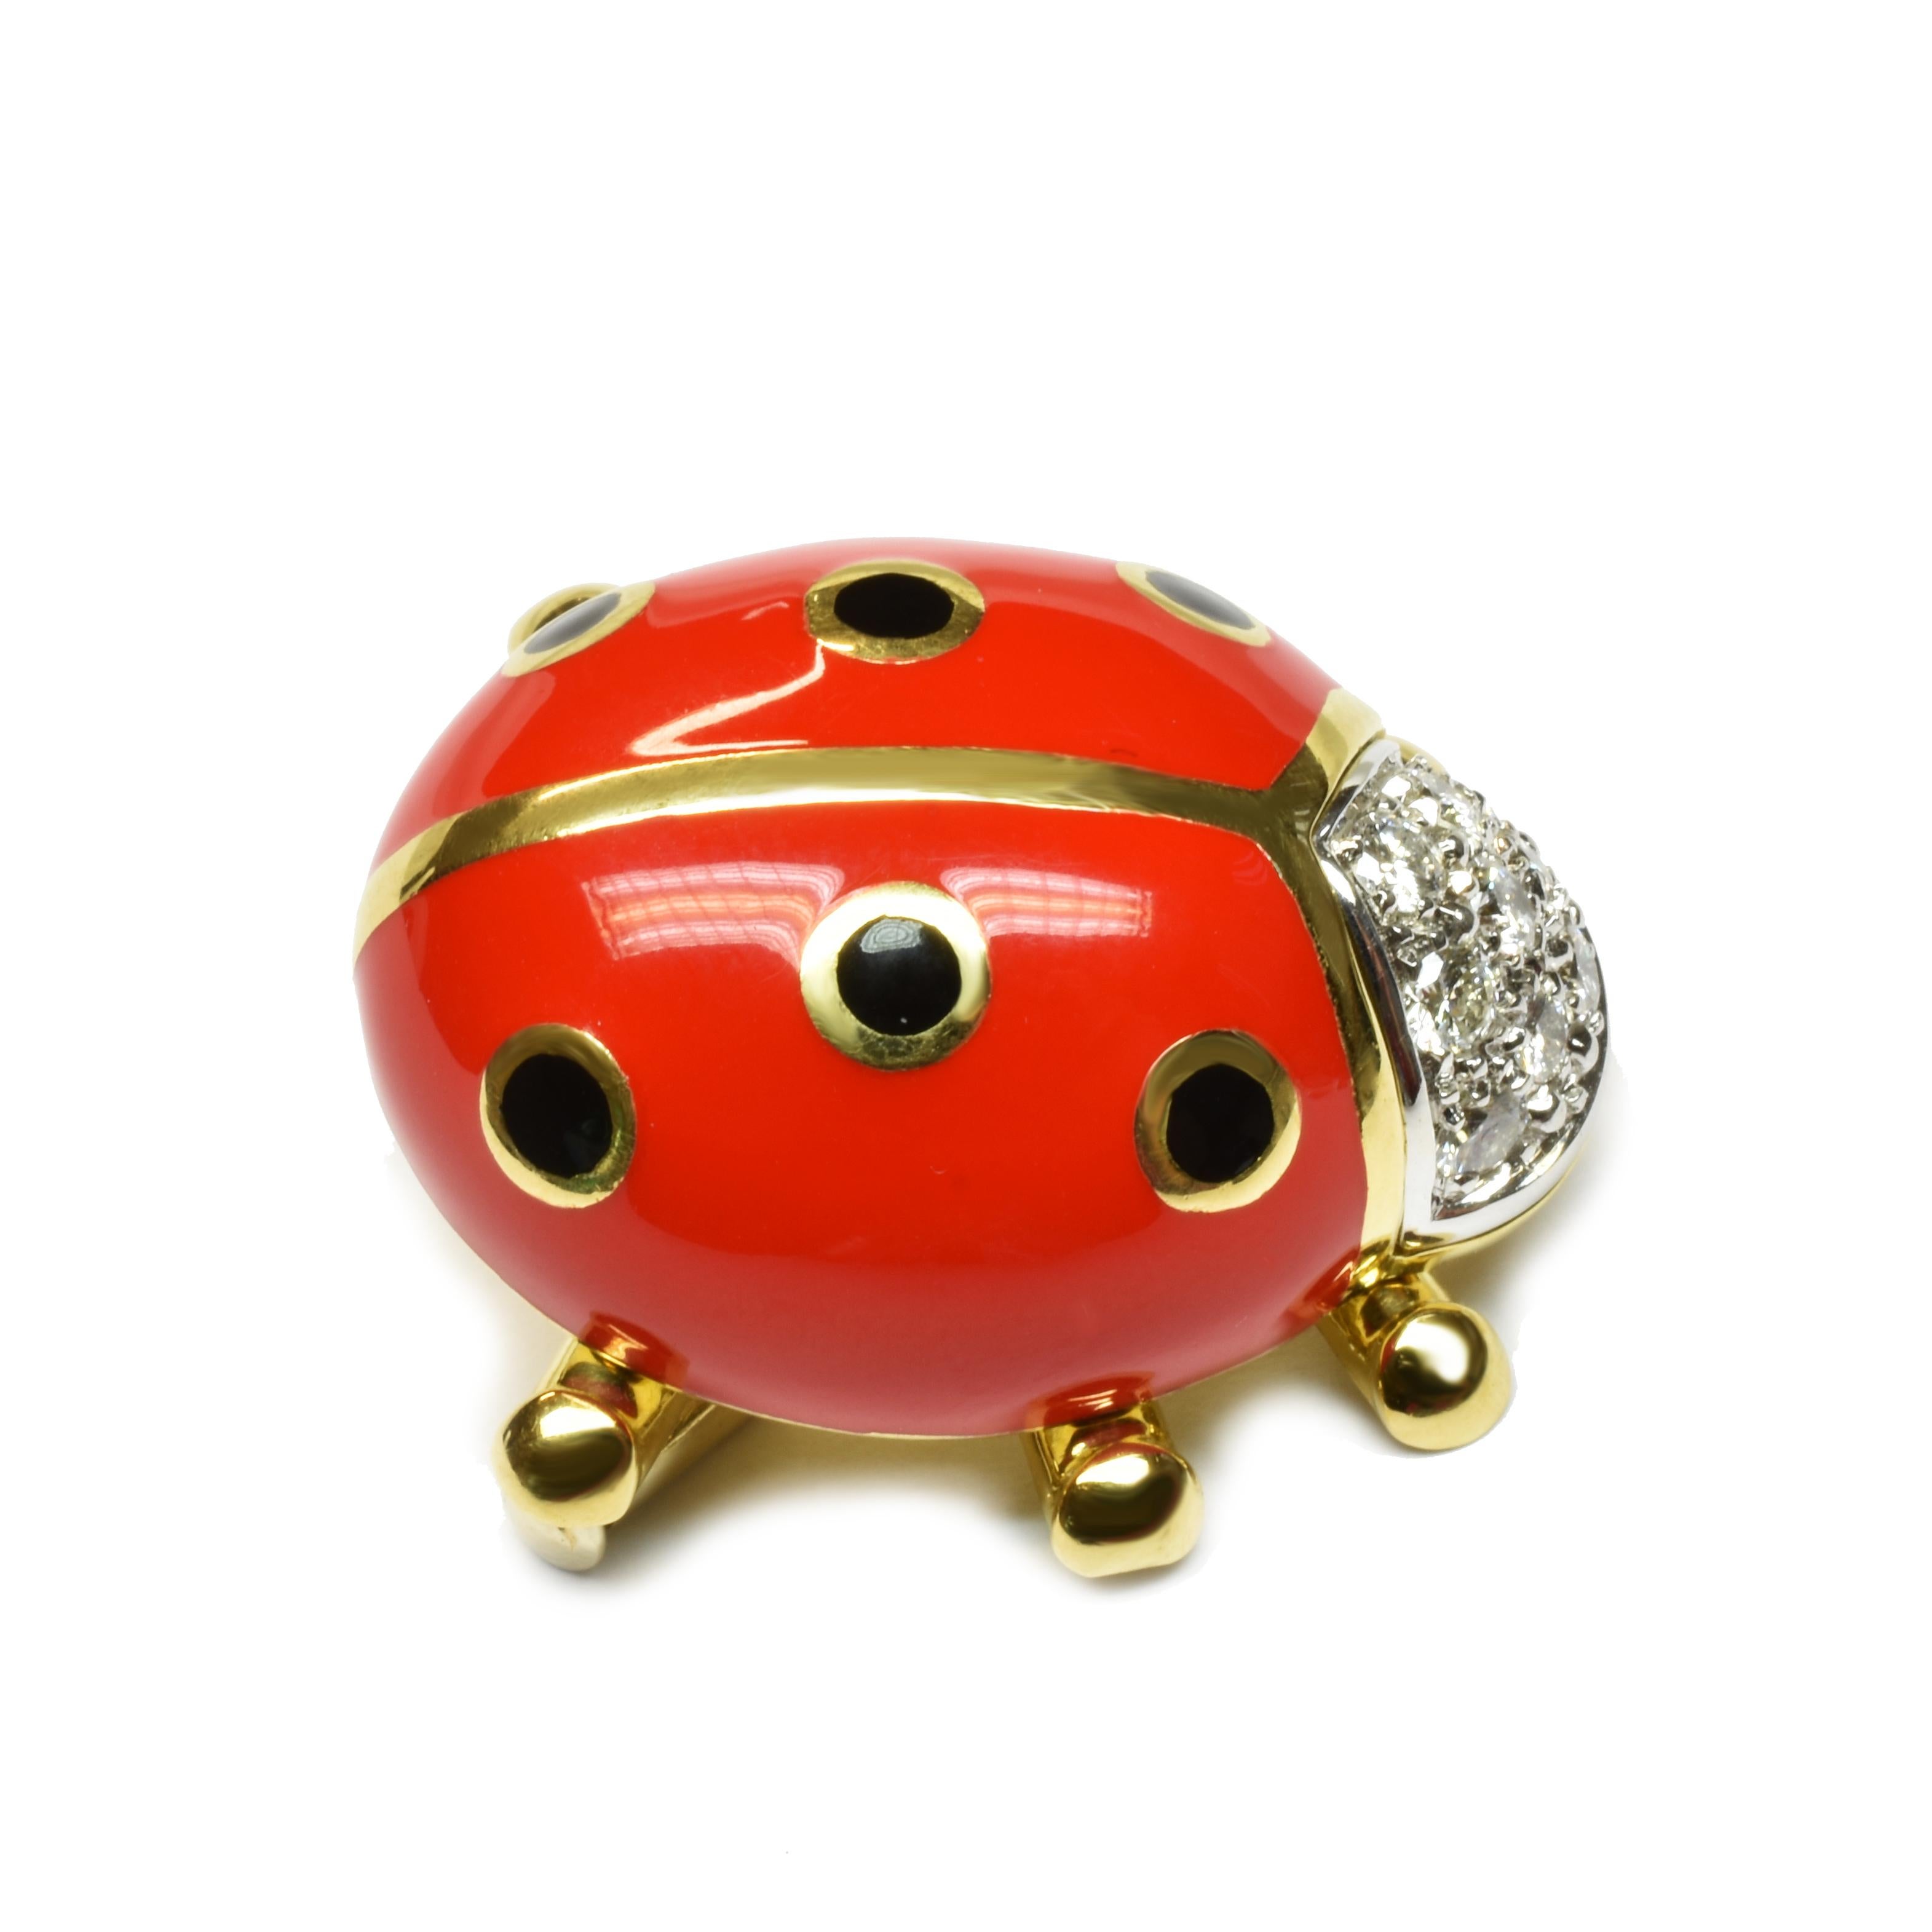 18Kt Gold Ladybug Brooch with White Diamonds and Red Enamel Body with Black Dots.
Handmade in our Atelier in Valenza Italy. 
The Piece is Mainly in 18Kt Yellow Gold. The Head is in 18Kt White Gold.
